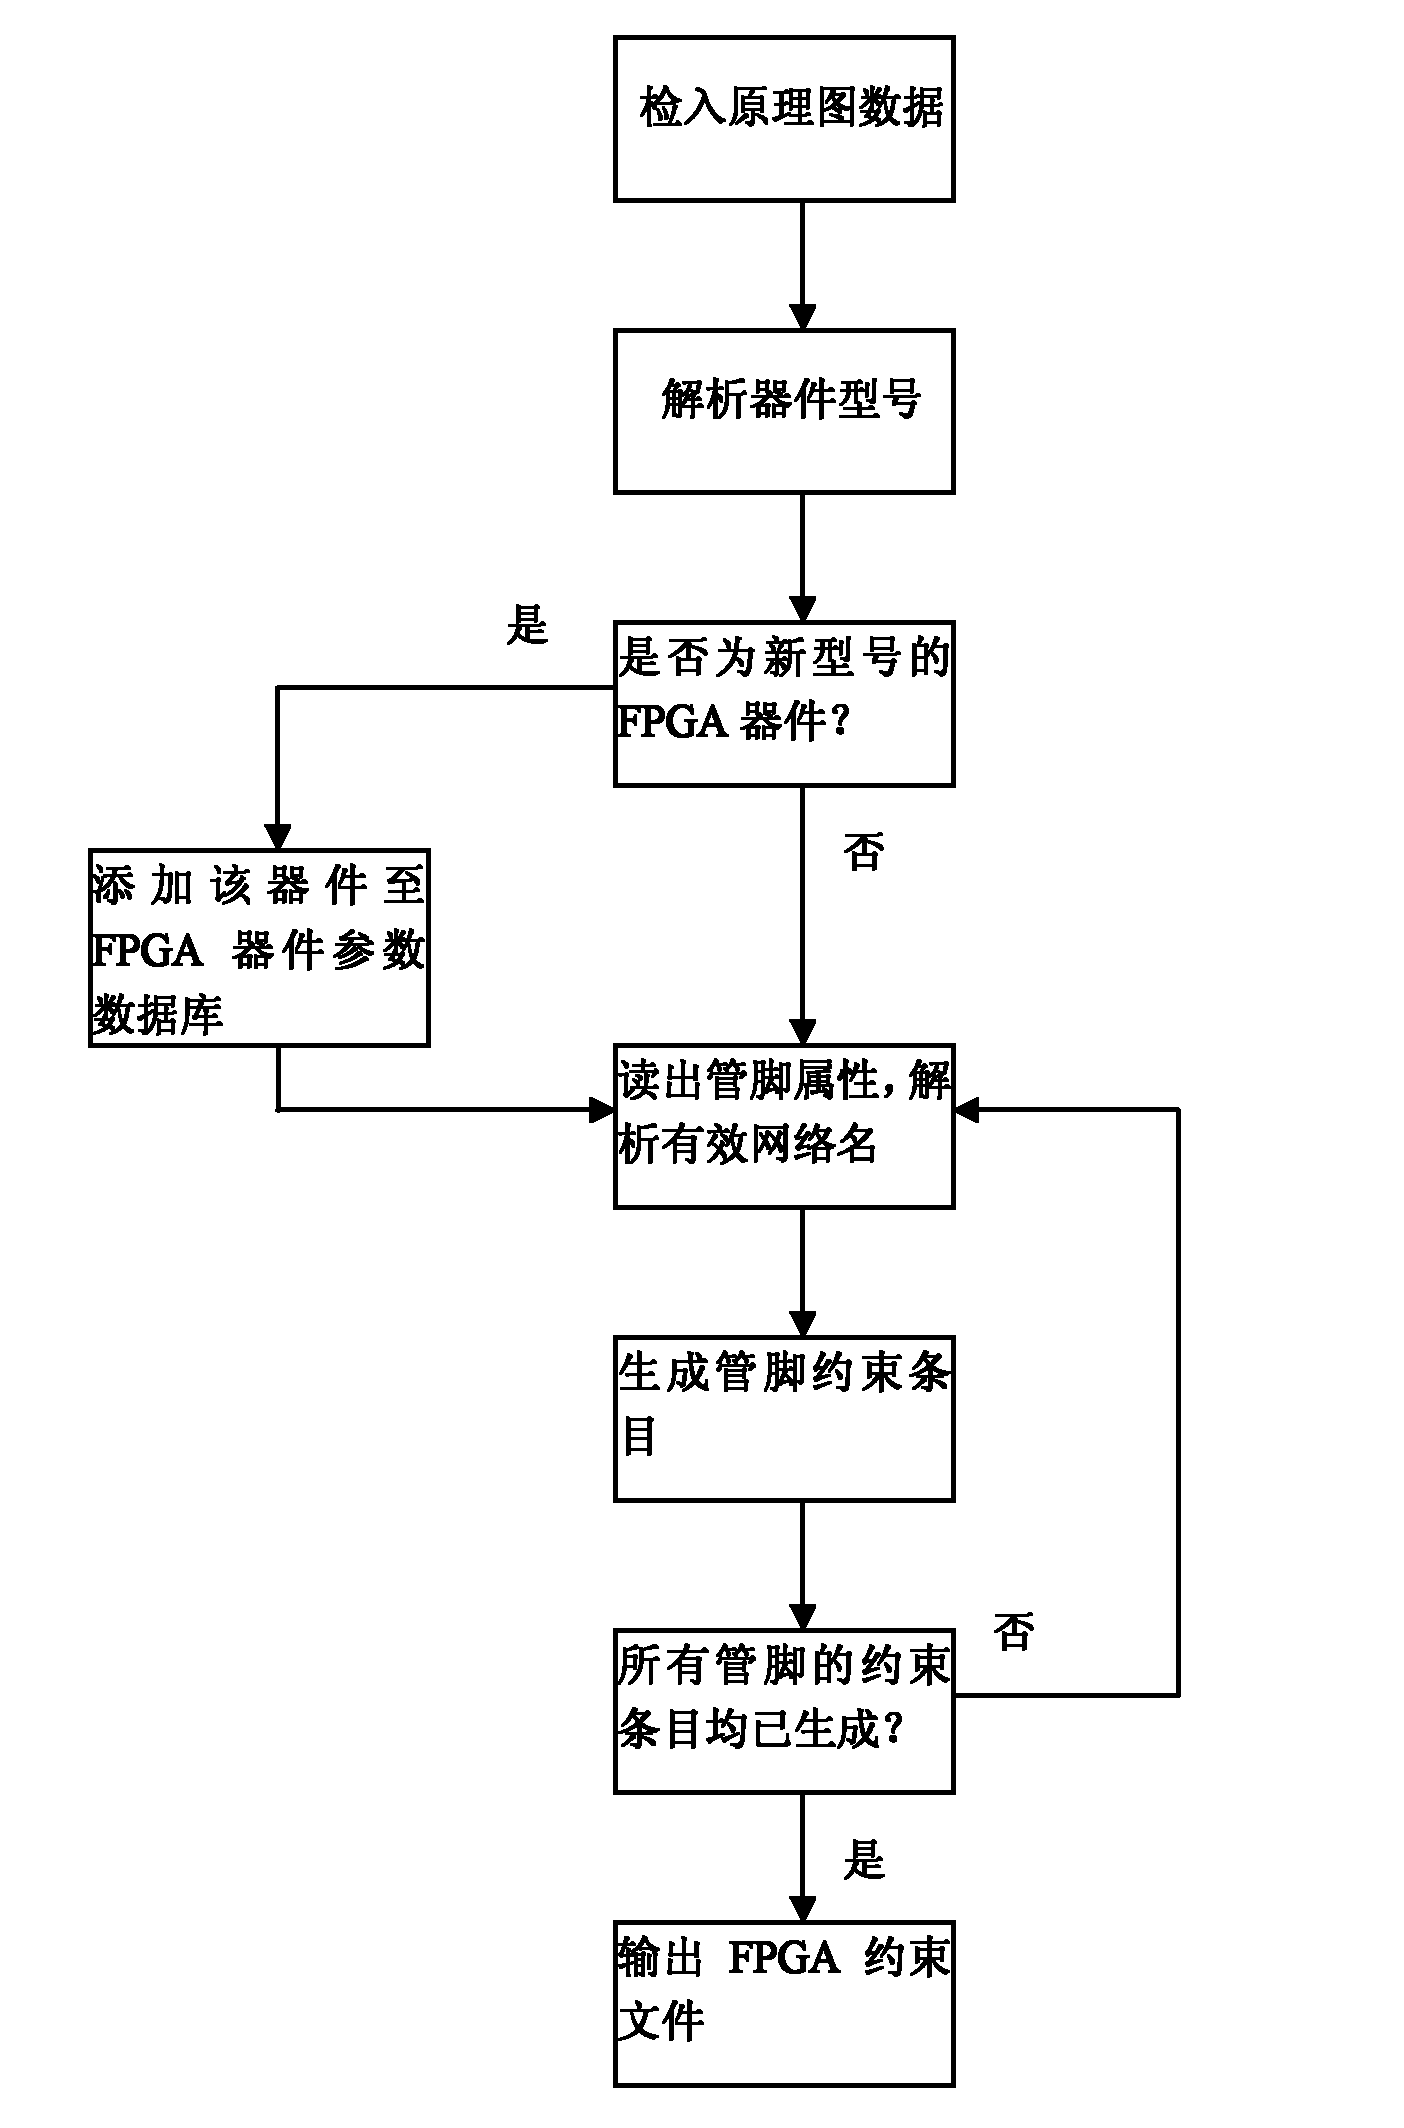 System and method for automatically generating constraint file of field programmable gate array (FPGA)